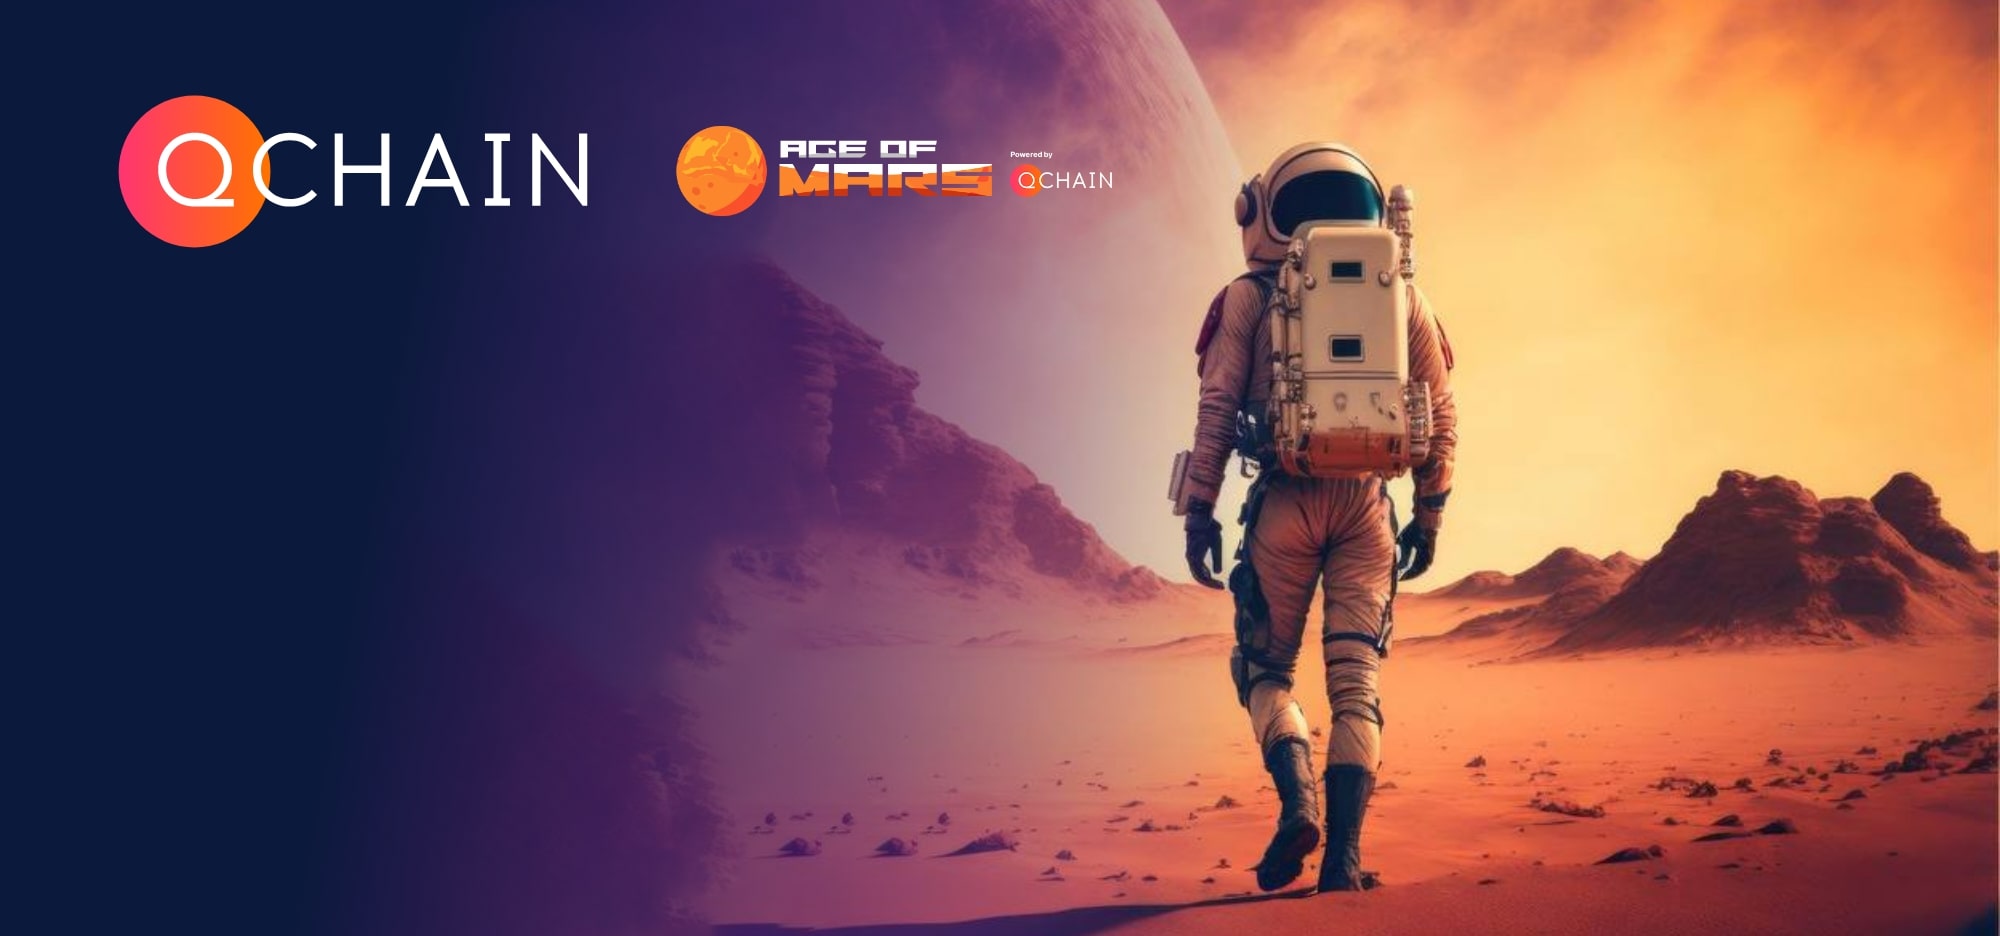 Age of Mars as part of Qchain ecosystem